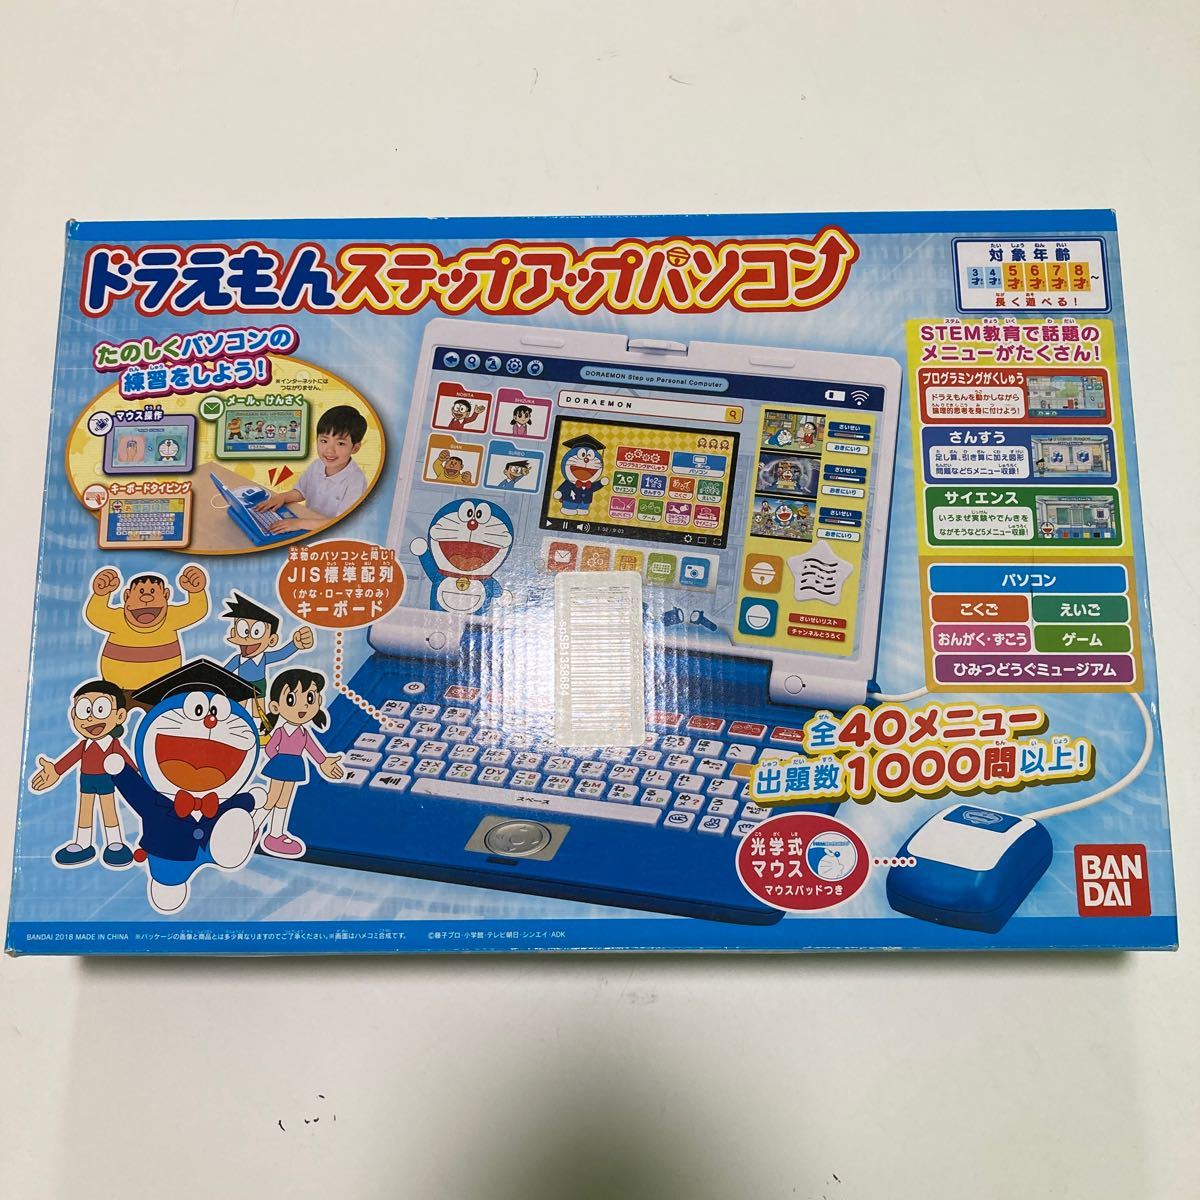 *11844 Doraemon step up personal computer operation not yet verification 